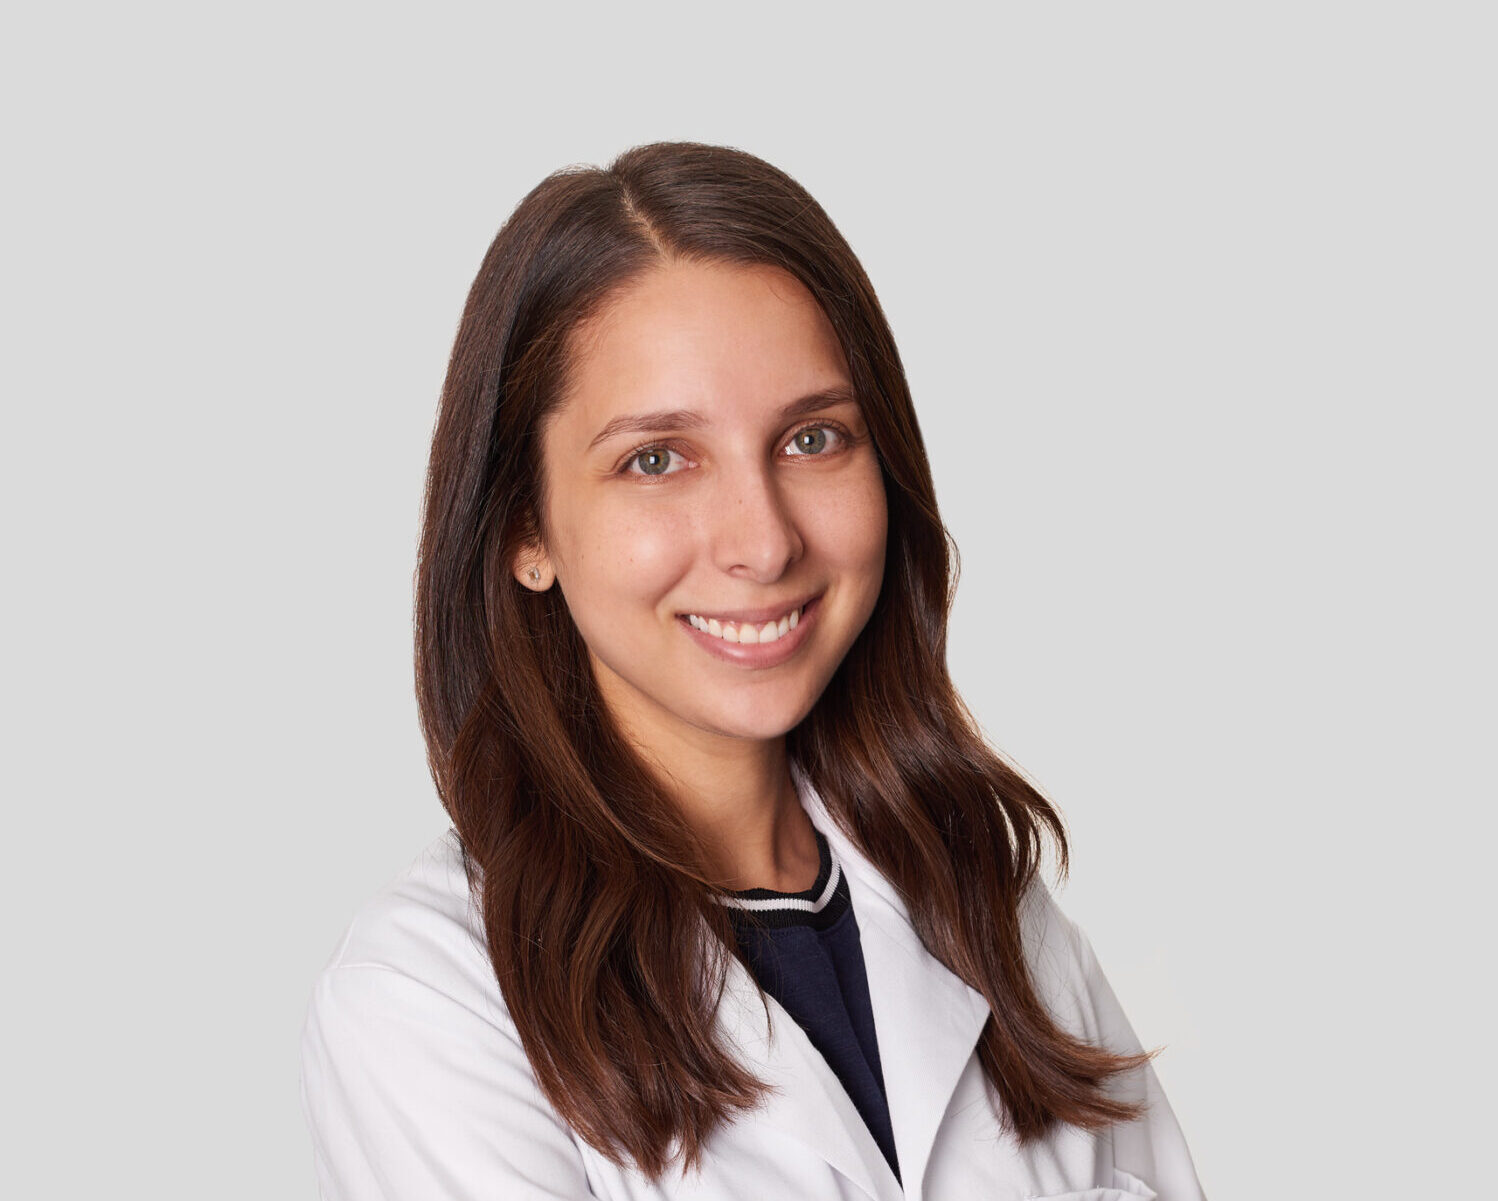 Dr. Mariel Covo of the Animal Medical Center of New York City